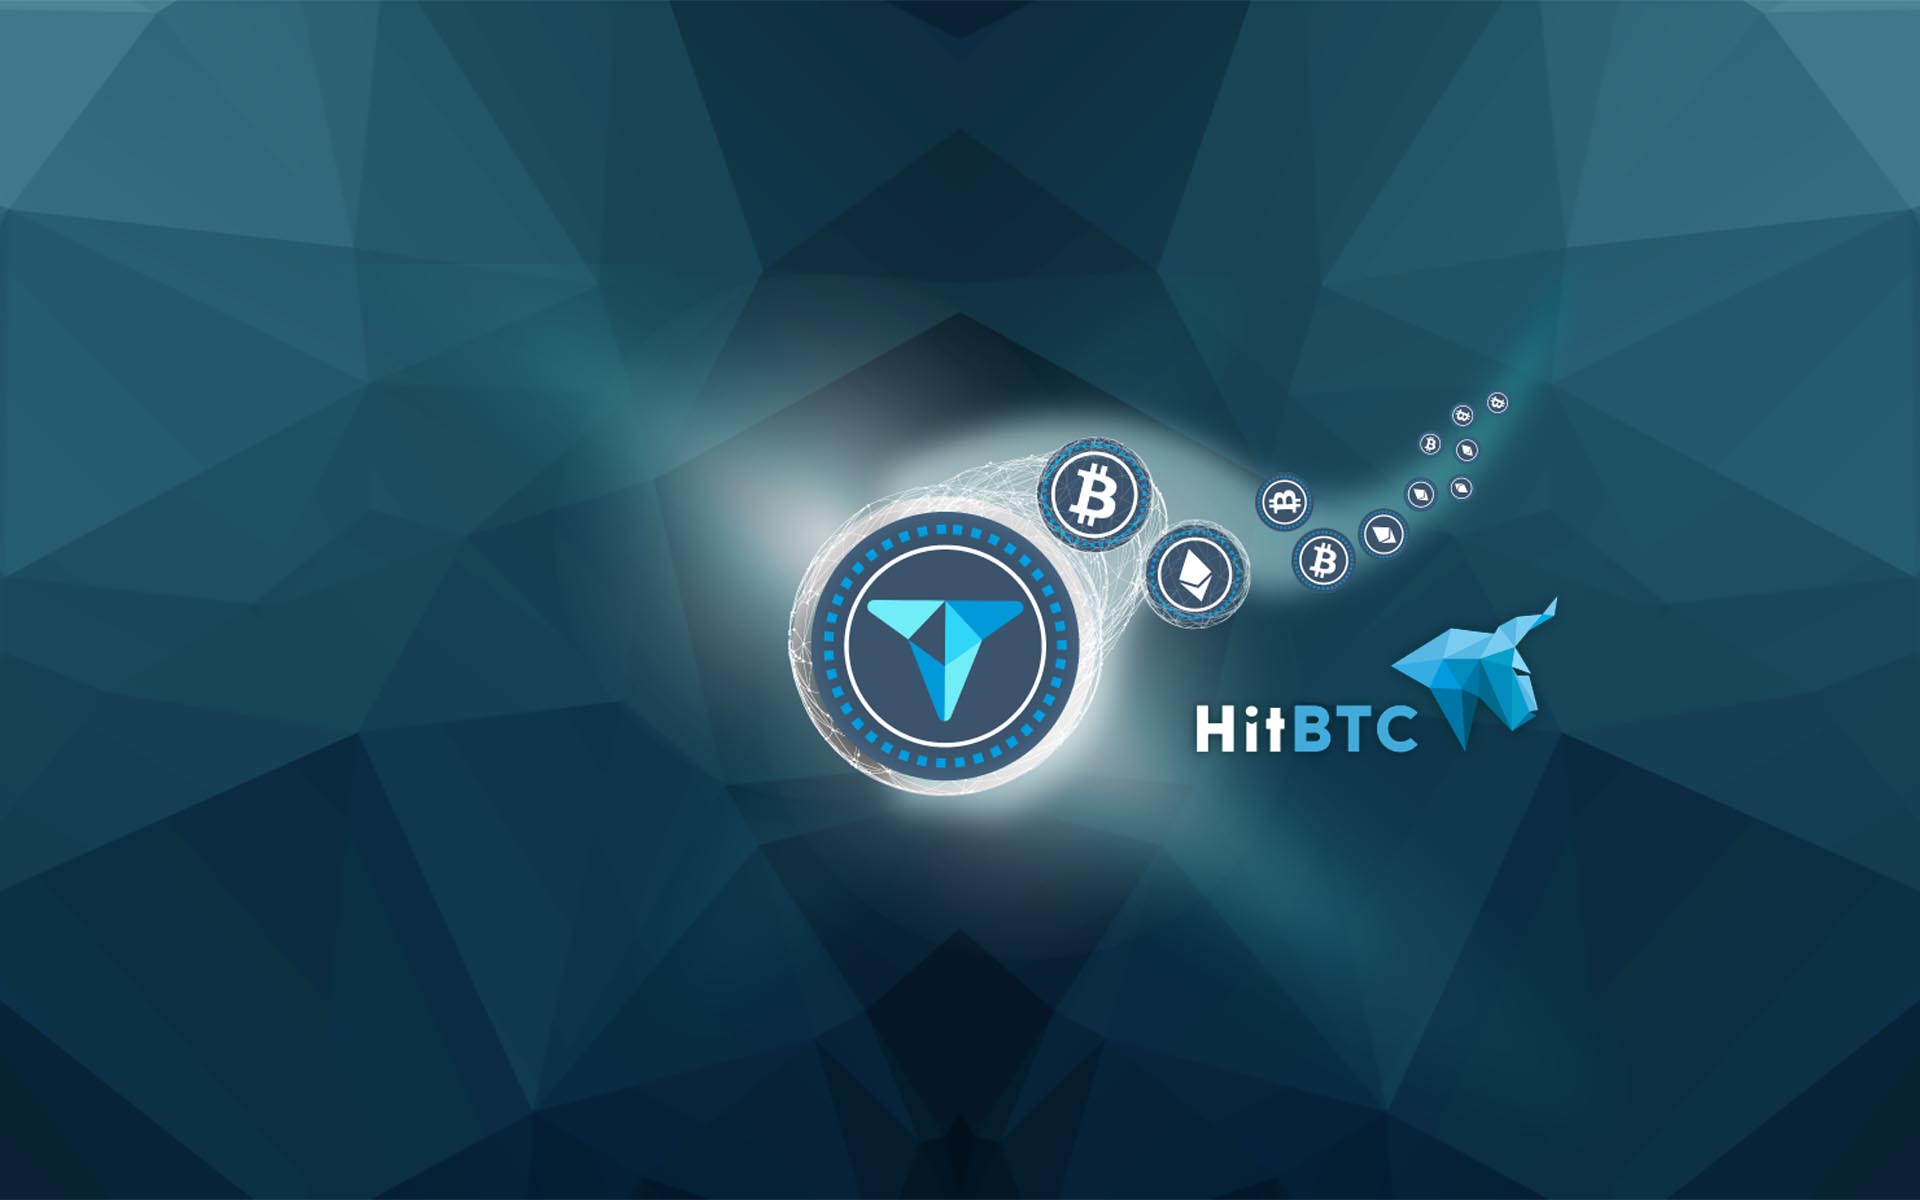 Trade.io Trade Token to be Listed on HitBTC Exchange